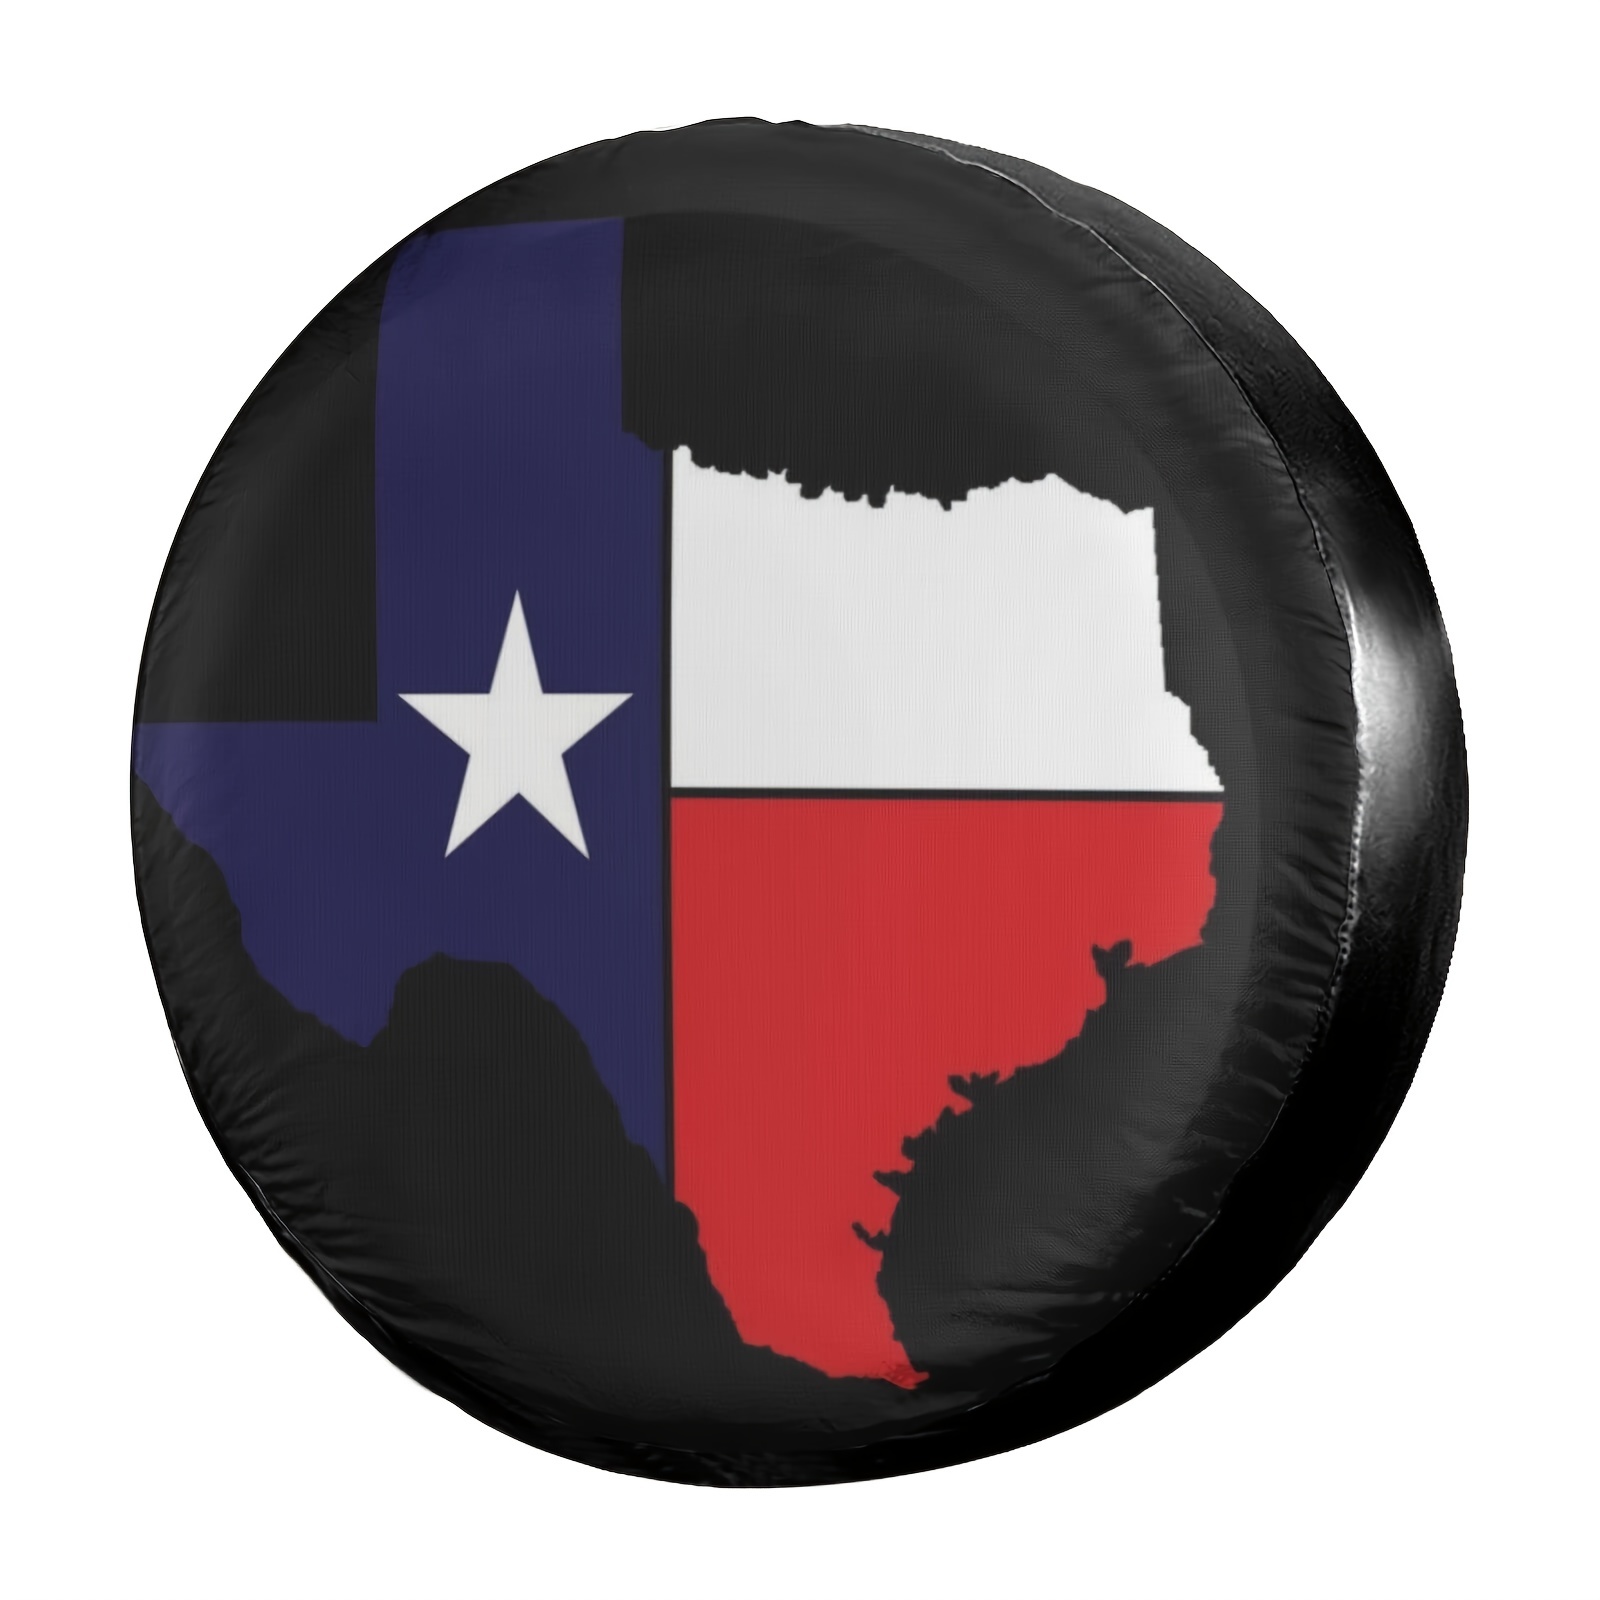 Foruidea Stand for The Flag, Kneel for The Cross Spare Tire Cover Wate - 3